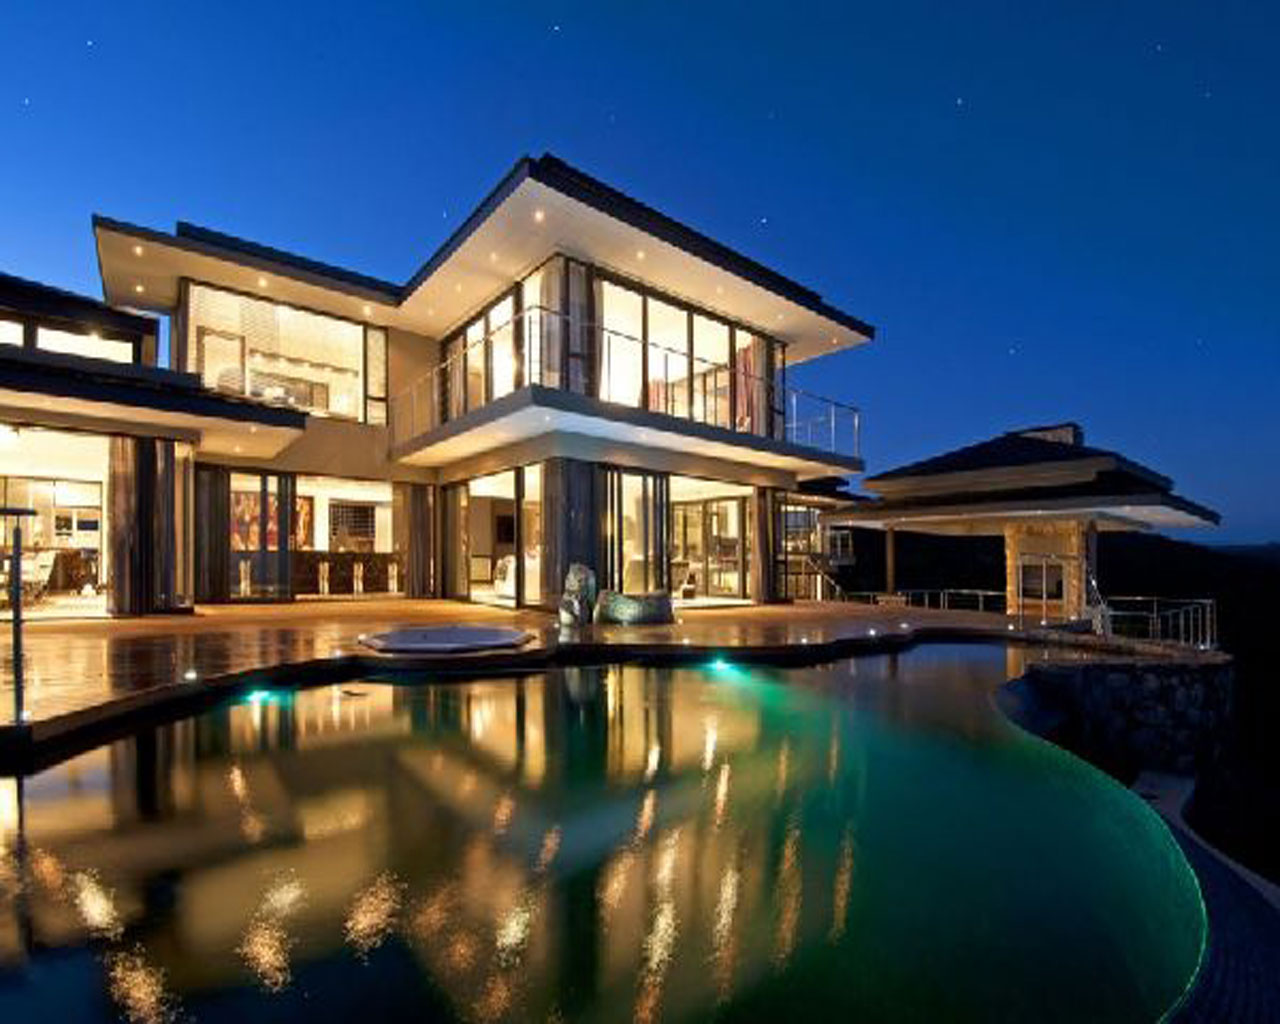 Amazing-architecture-designs-luxury-and-beautiful-house-exteriors-with-curving-swimming-pool-and-deck-with-cool-lighting-view-evening_nivasa_lk